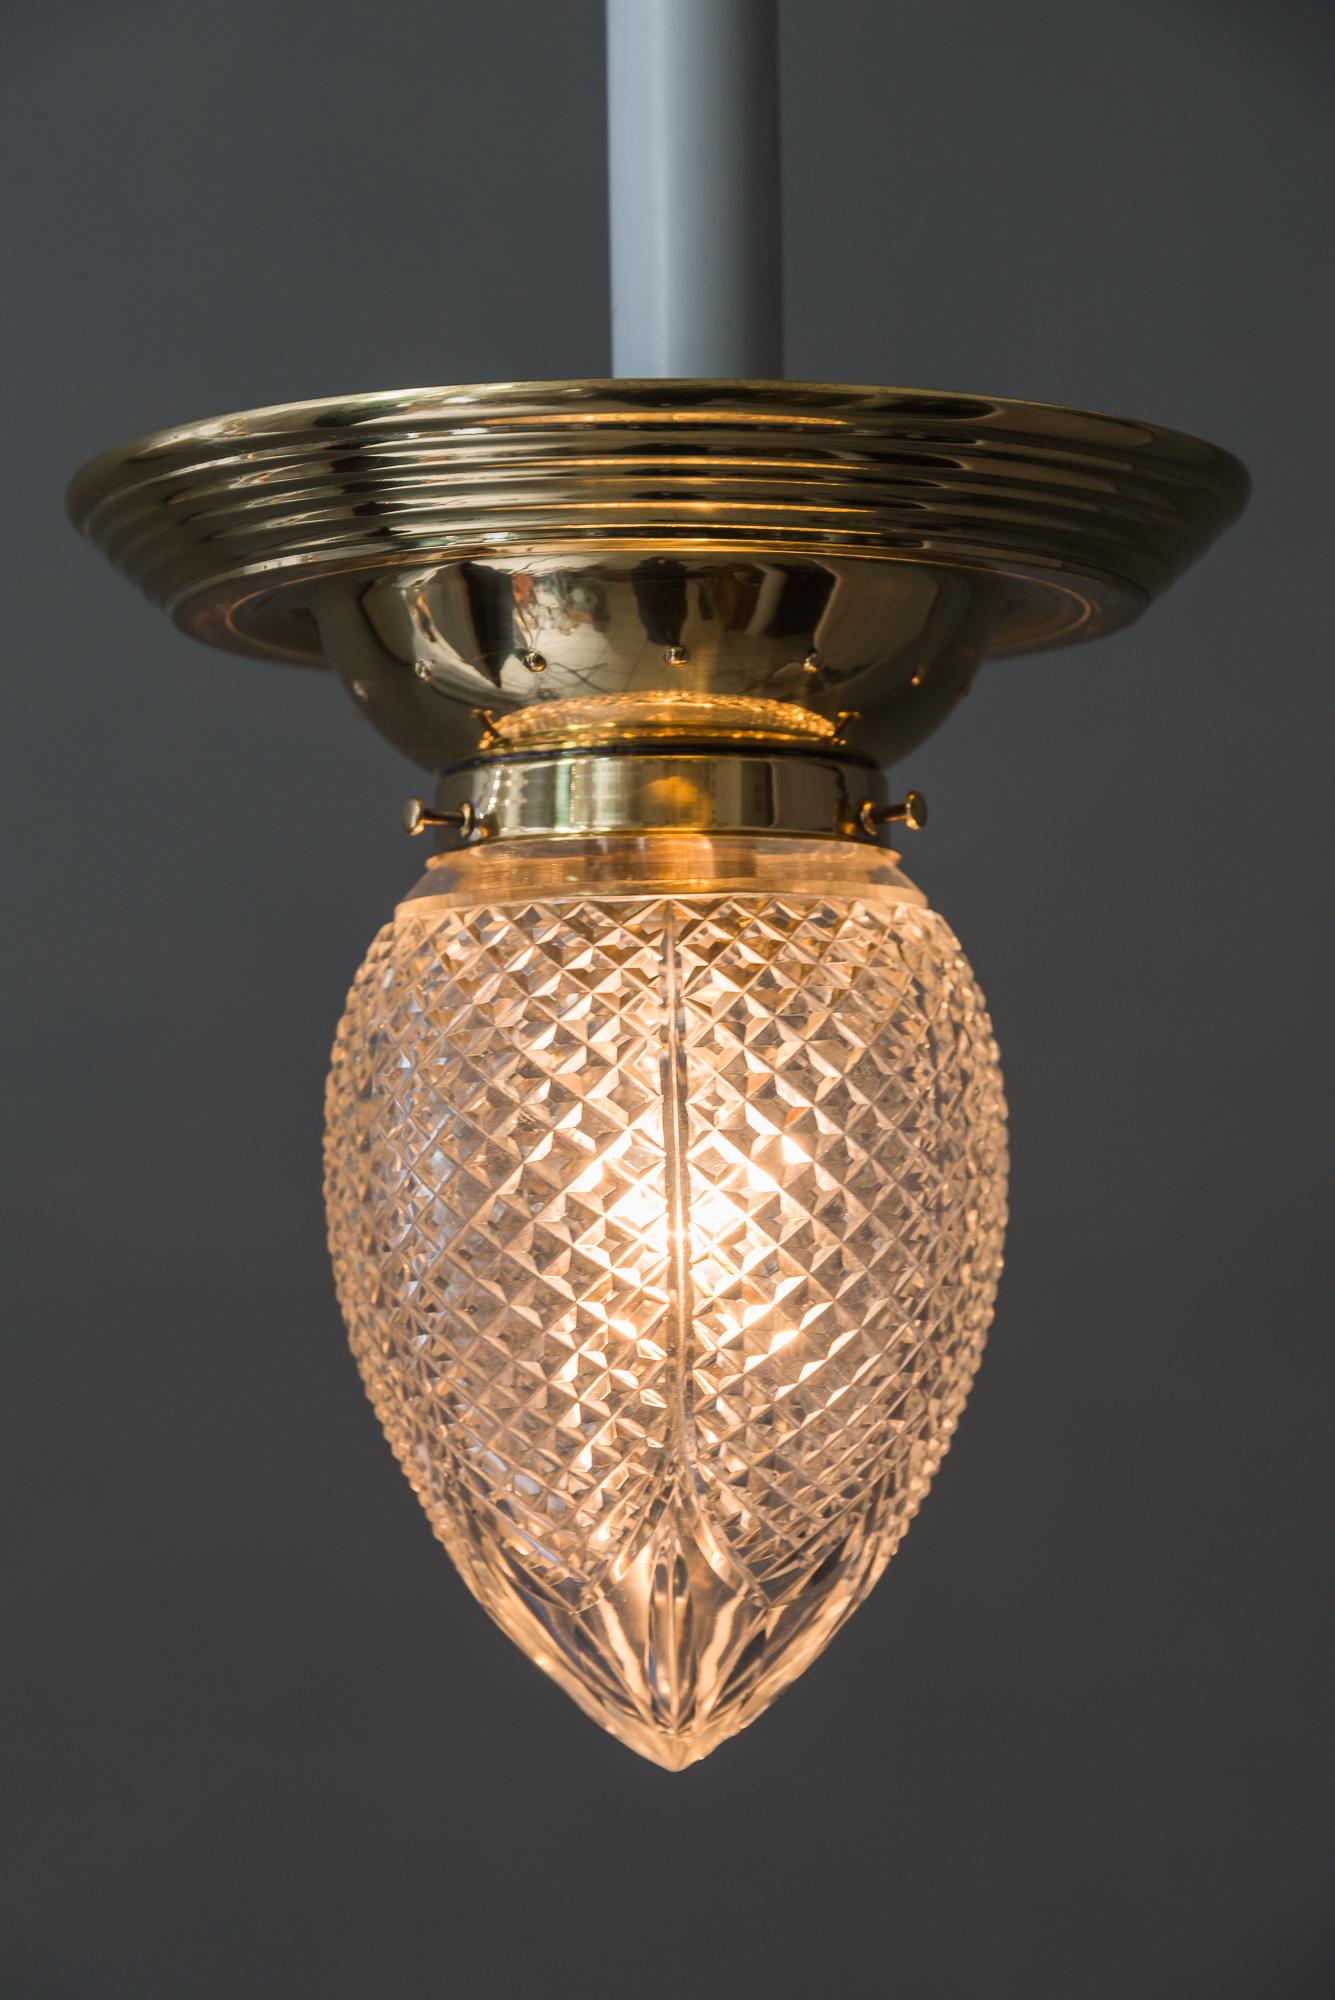 Early 20th Century Jugendstil Ceiling Lamp with Original Cut Glass, circa 1908